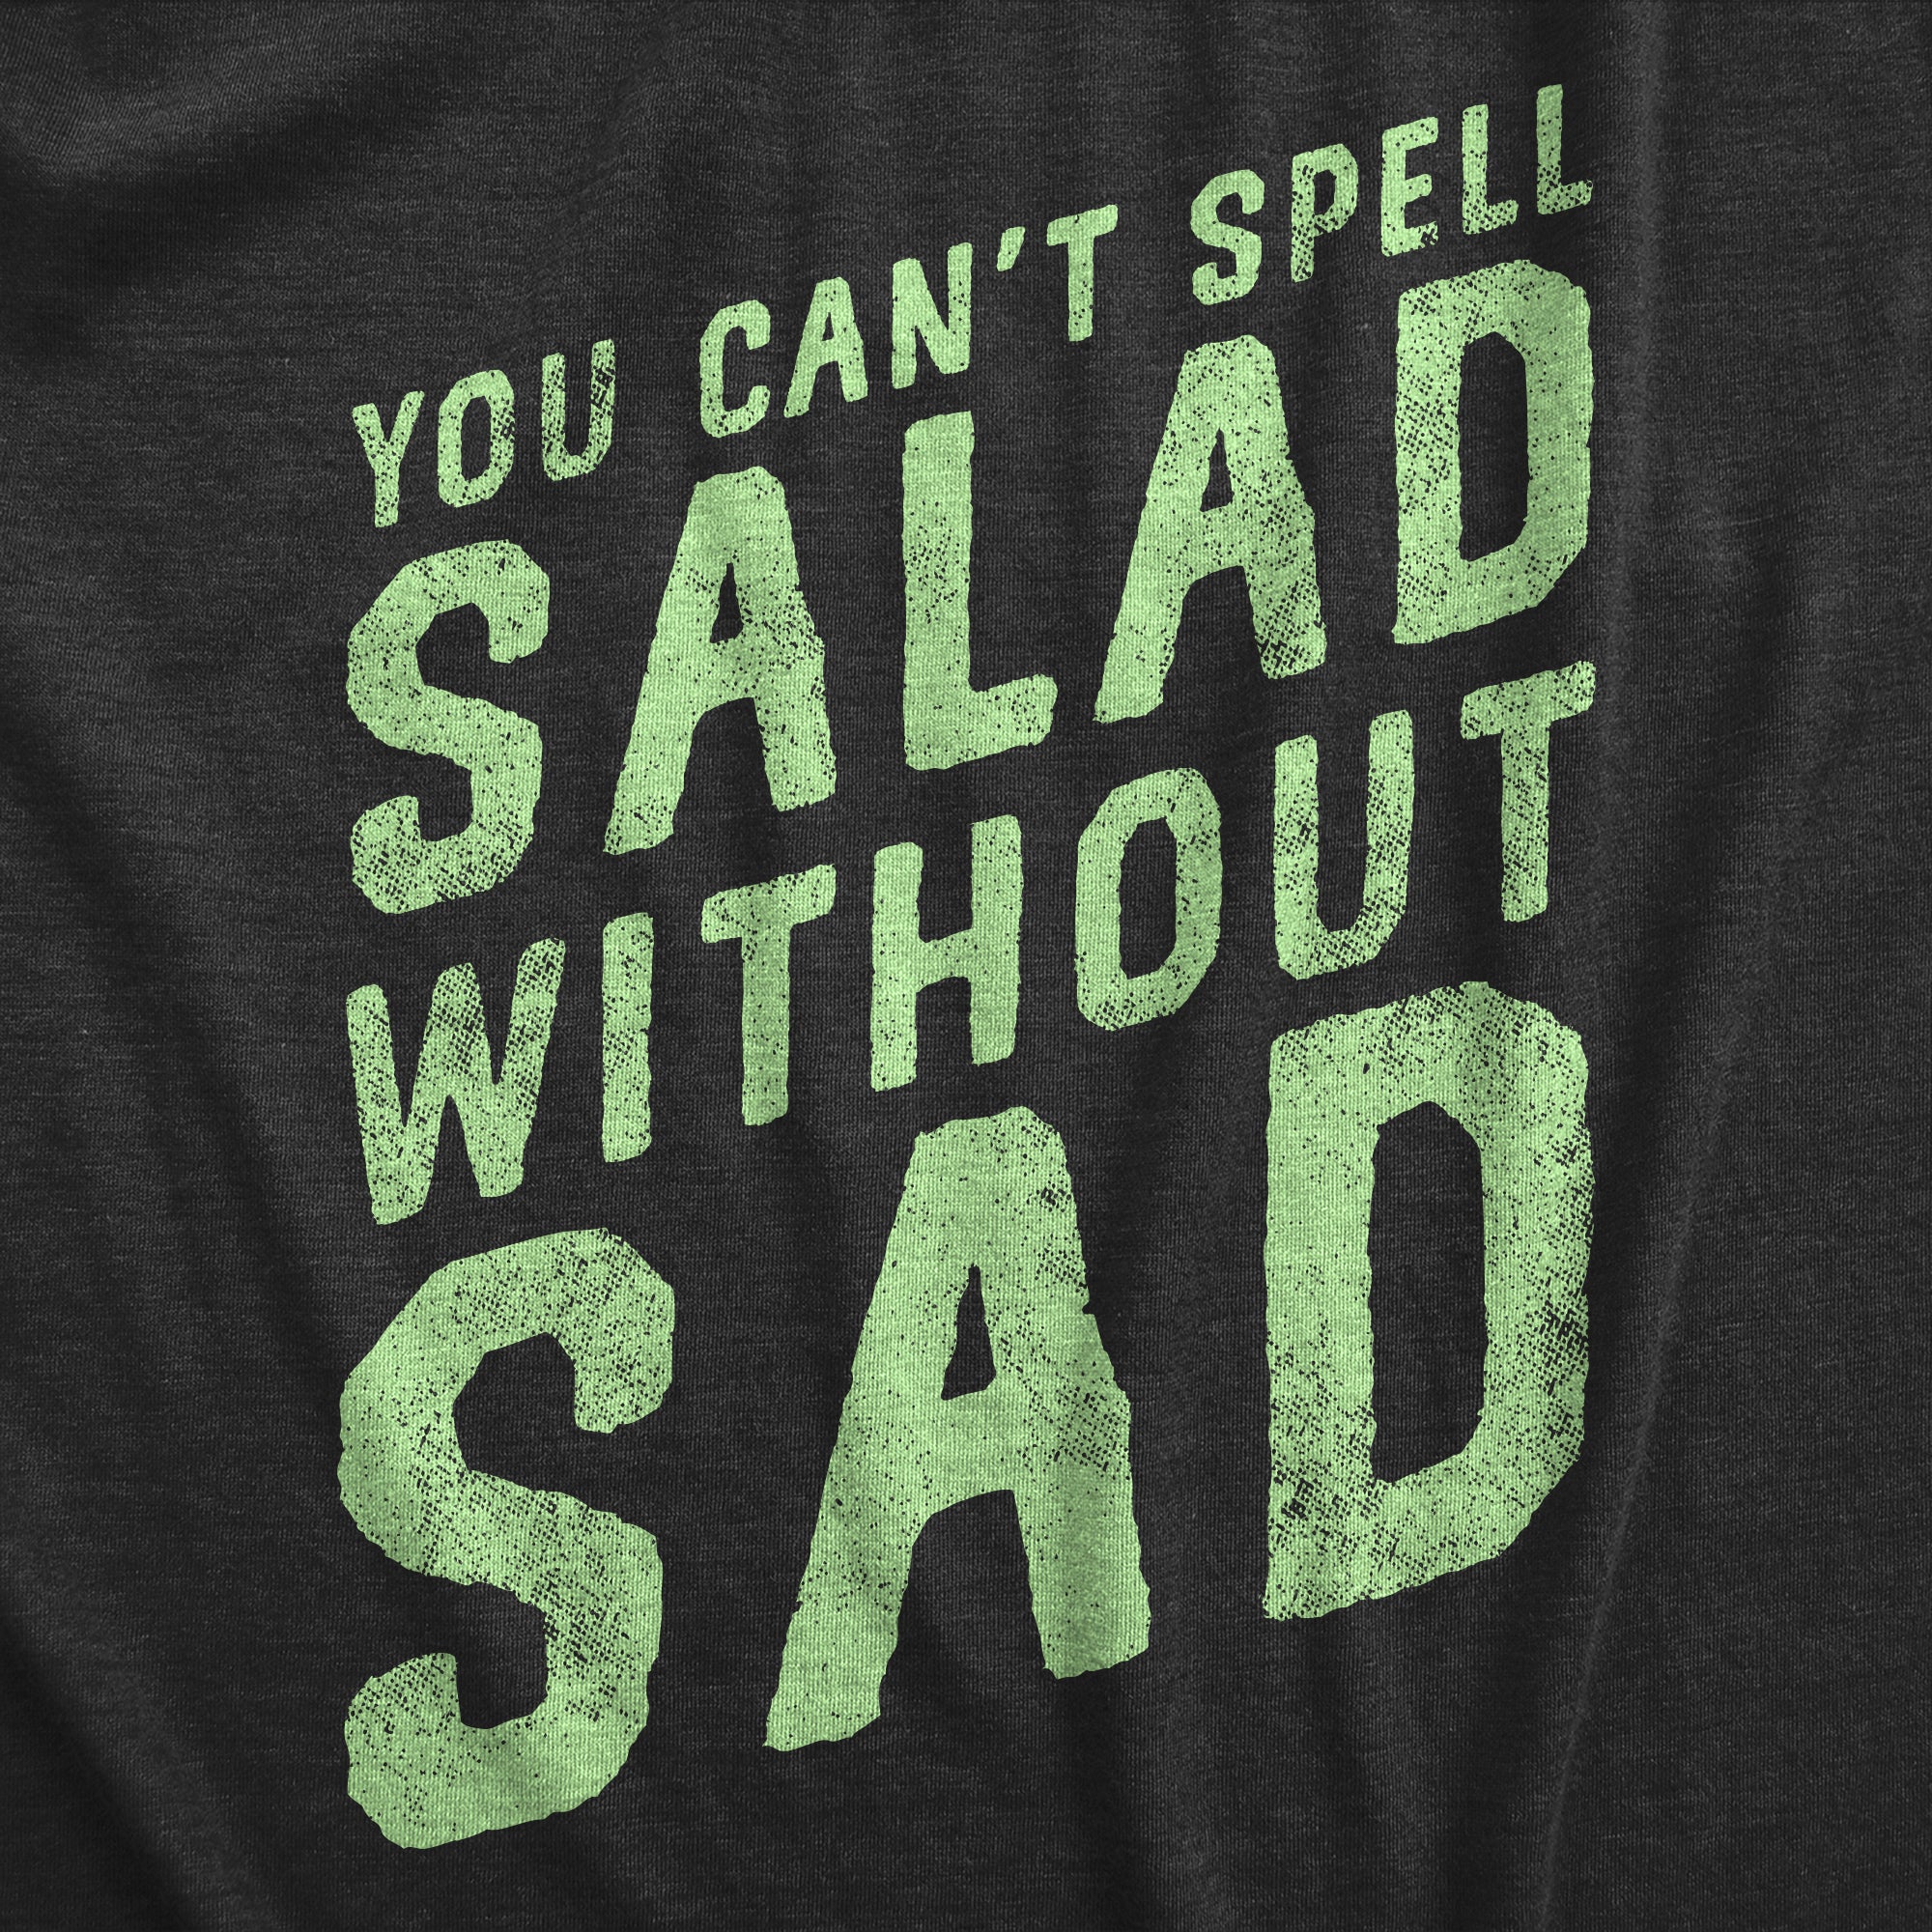 Funny Heather Black - SALAD You Cant Spell Salad Without Sad Womens T Shirt Nerdy Food sarcastic Tee